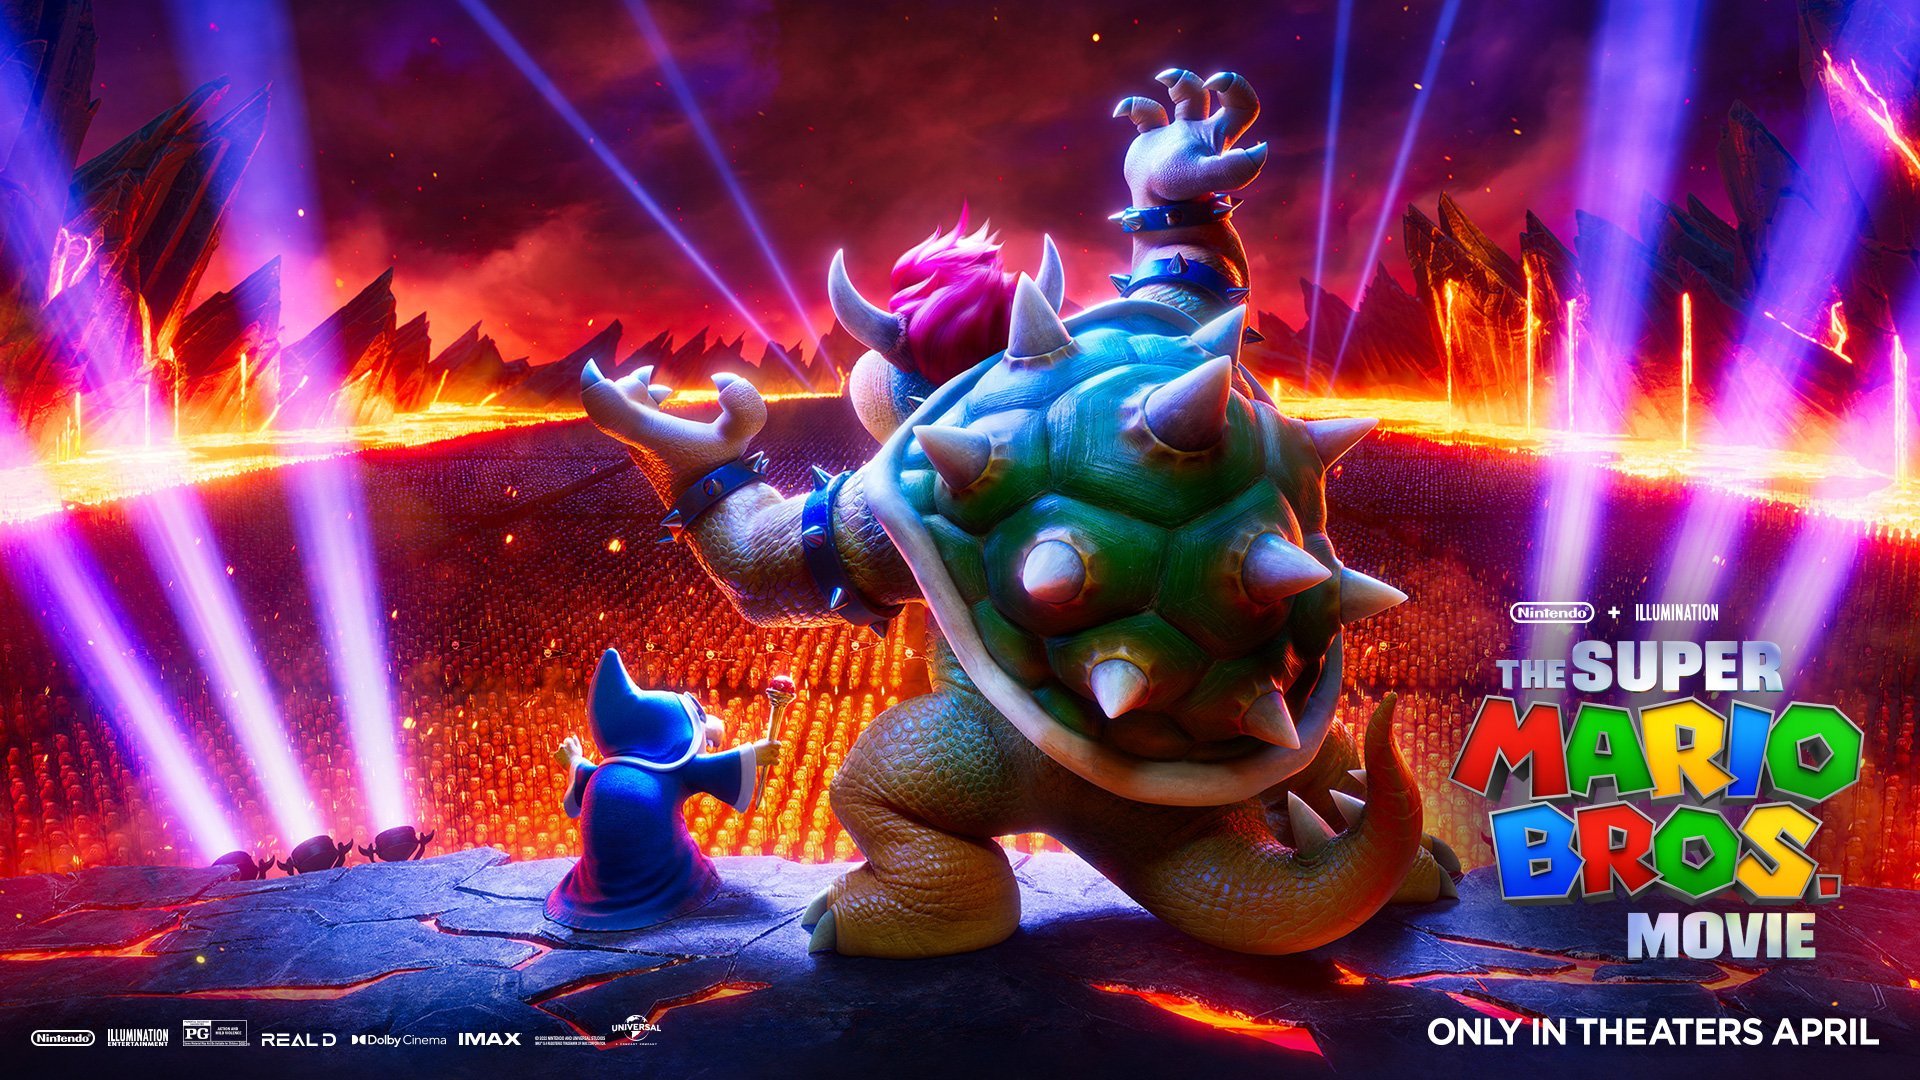 Super Mario Bros. Movie Shares New Posters Of DK & Bowser, Here's A